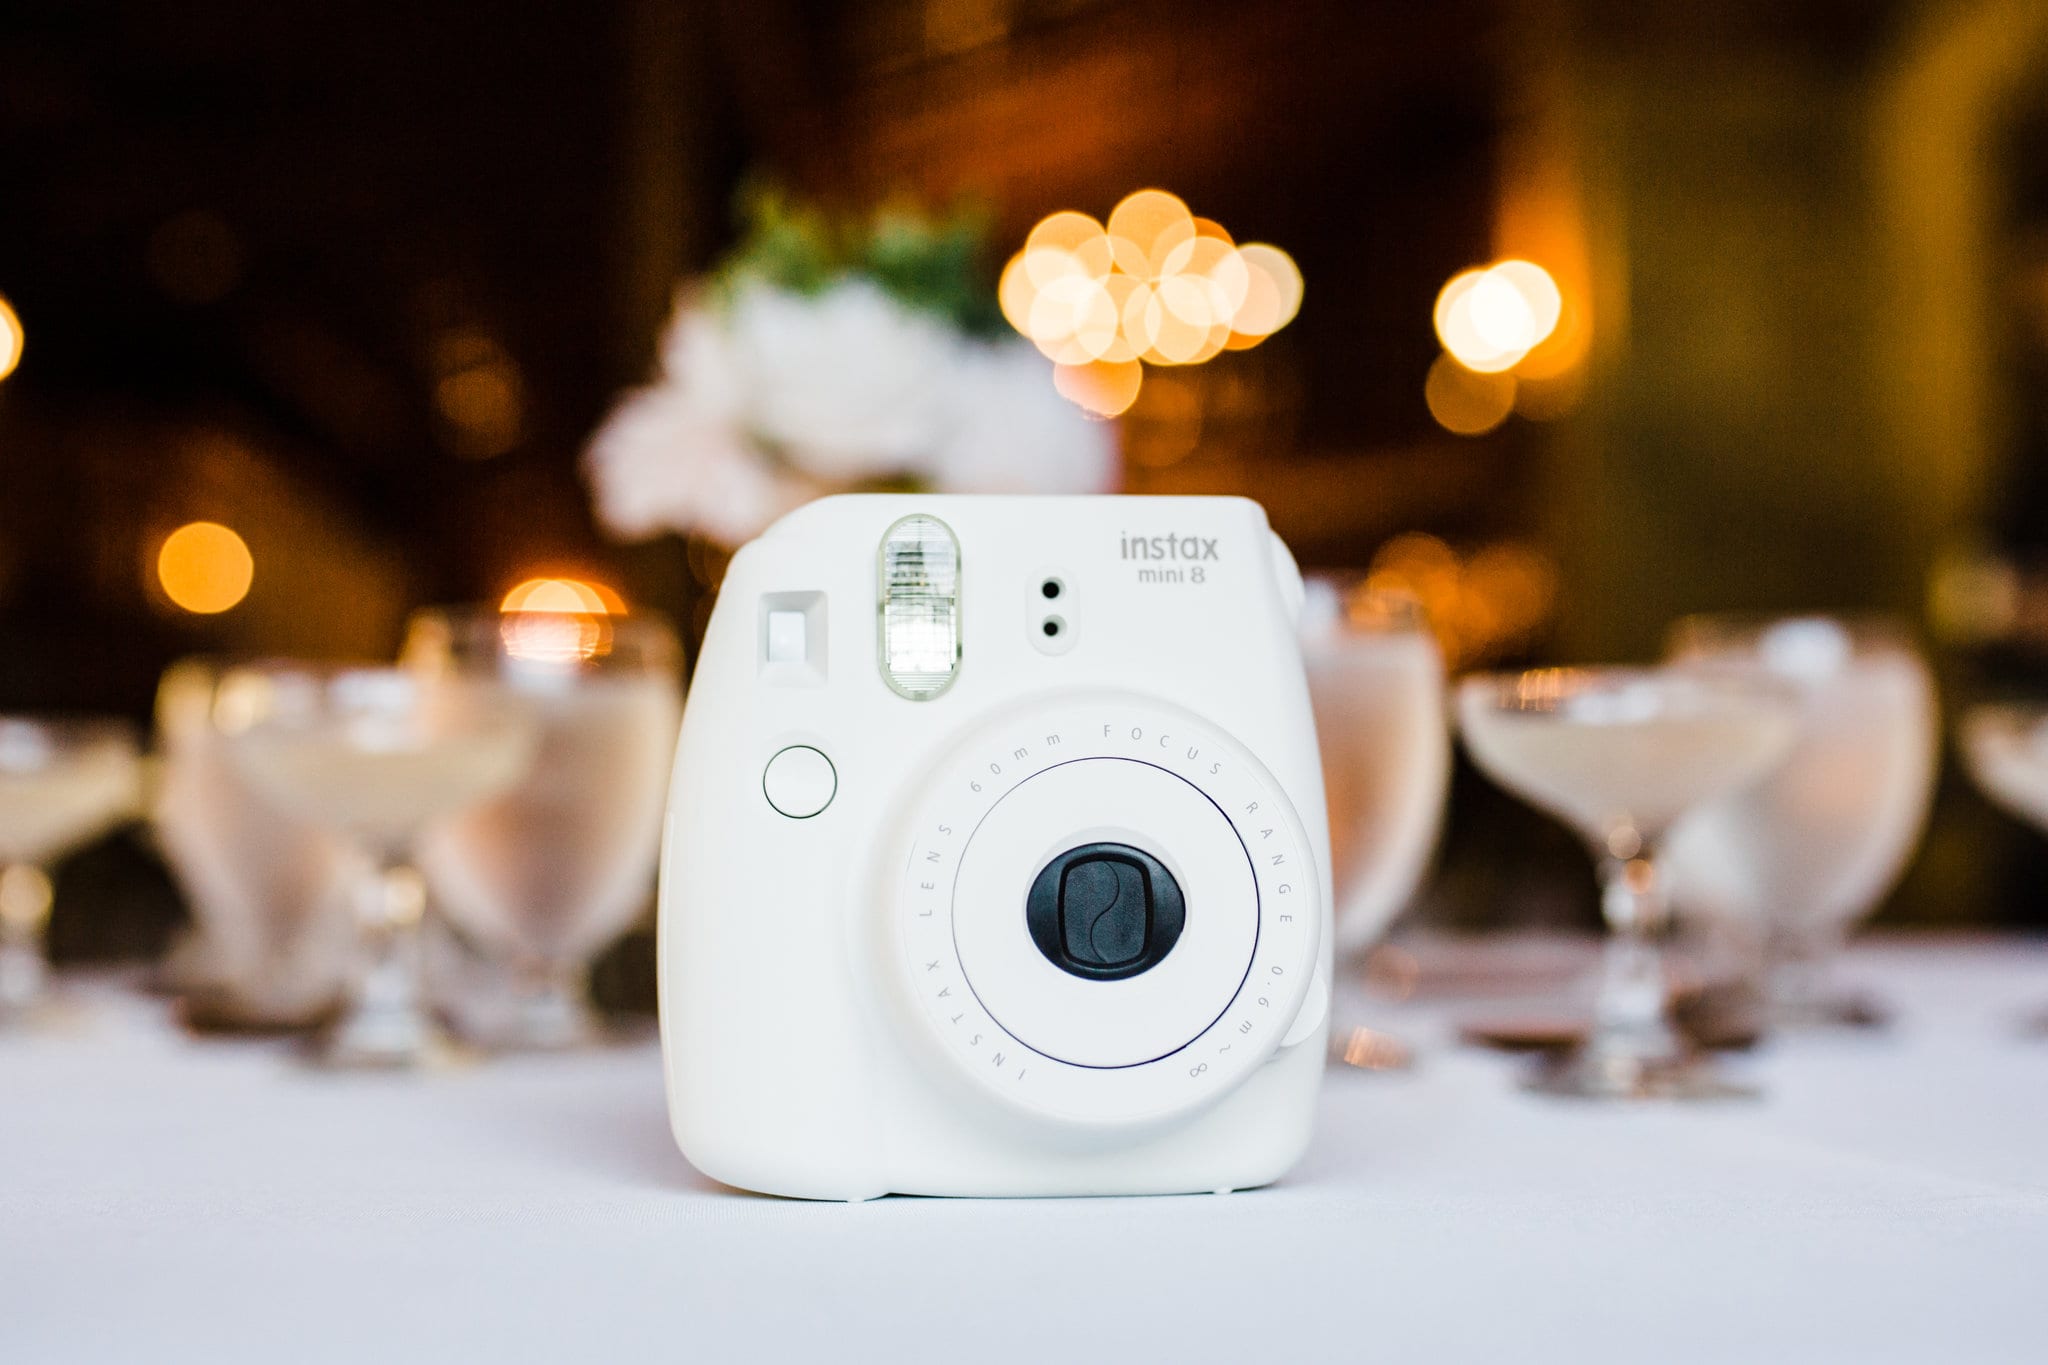 instax cameras at reception for guests to use